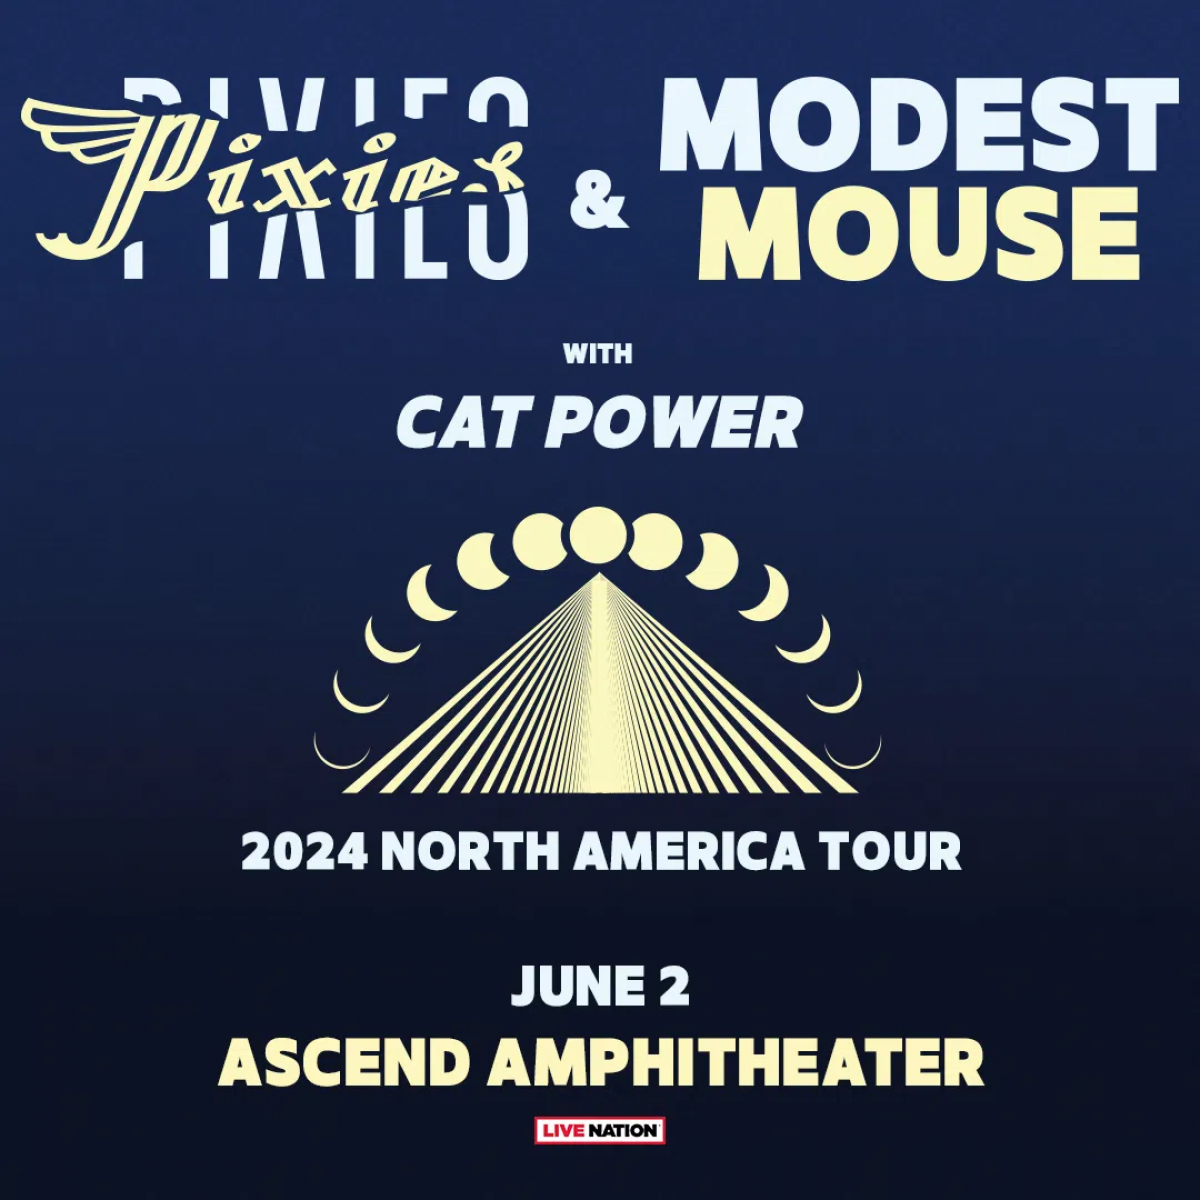 Pixies and Modest Mouse - Register To Win